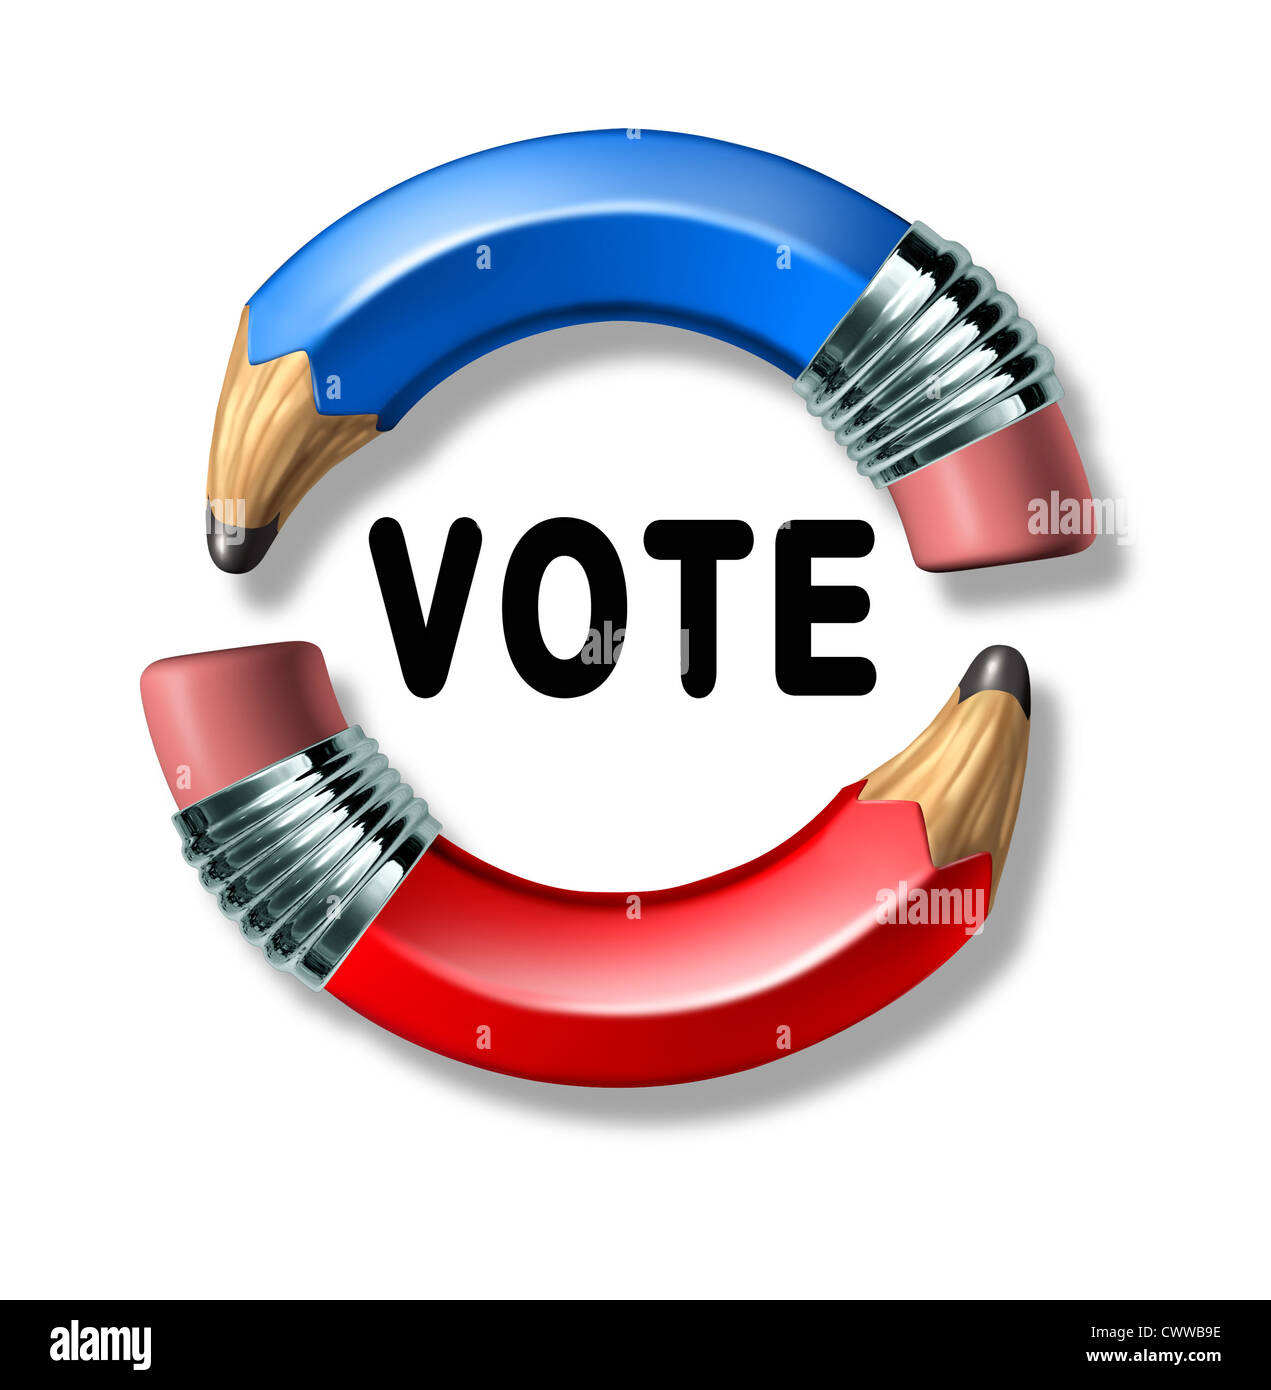 Vote symbol with curved pencils Stock Photo